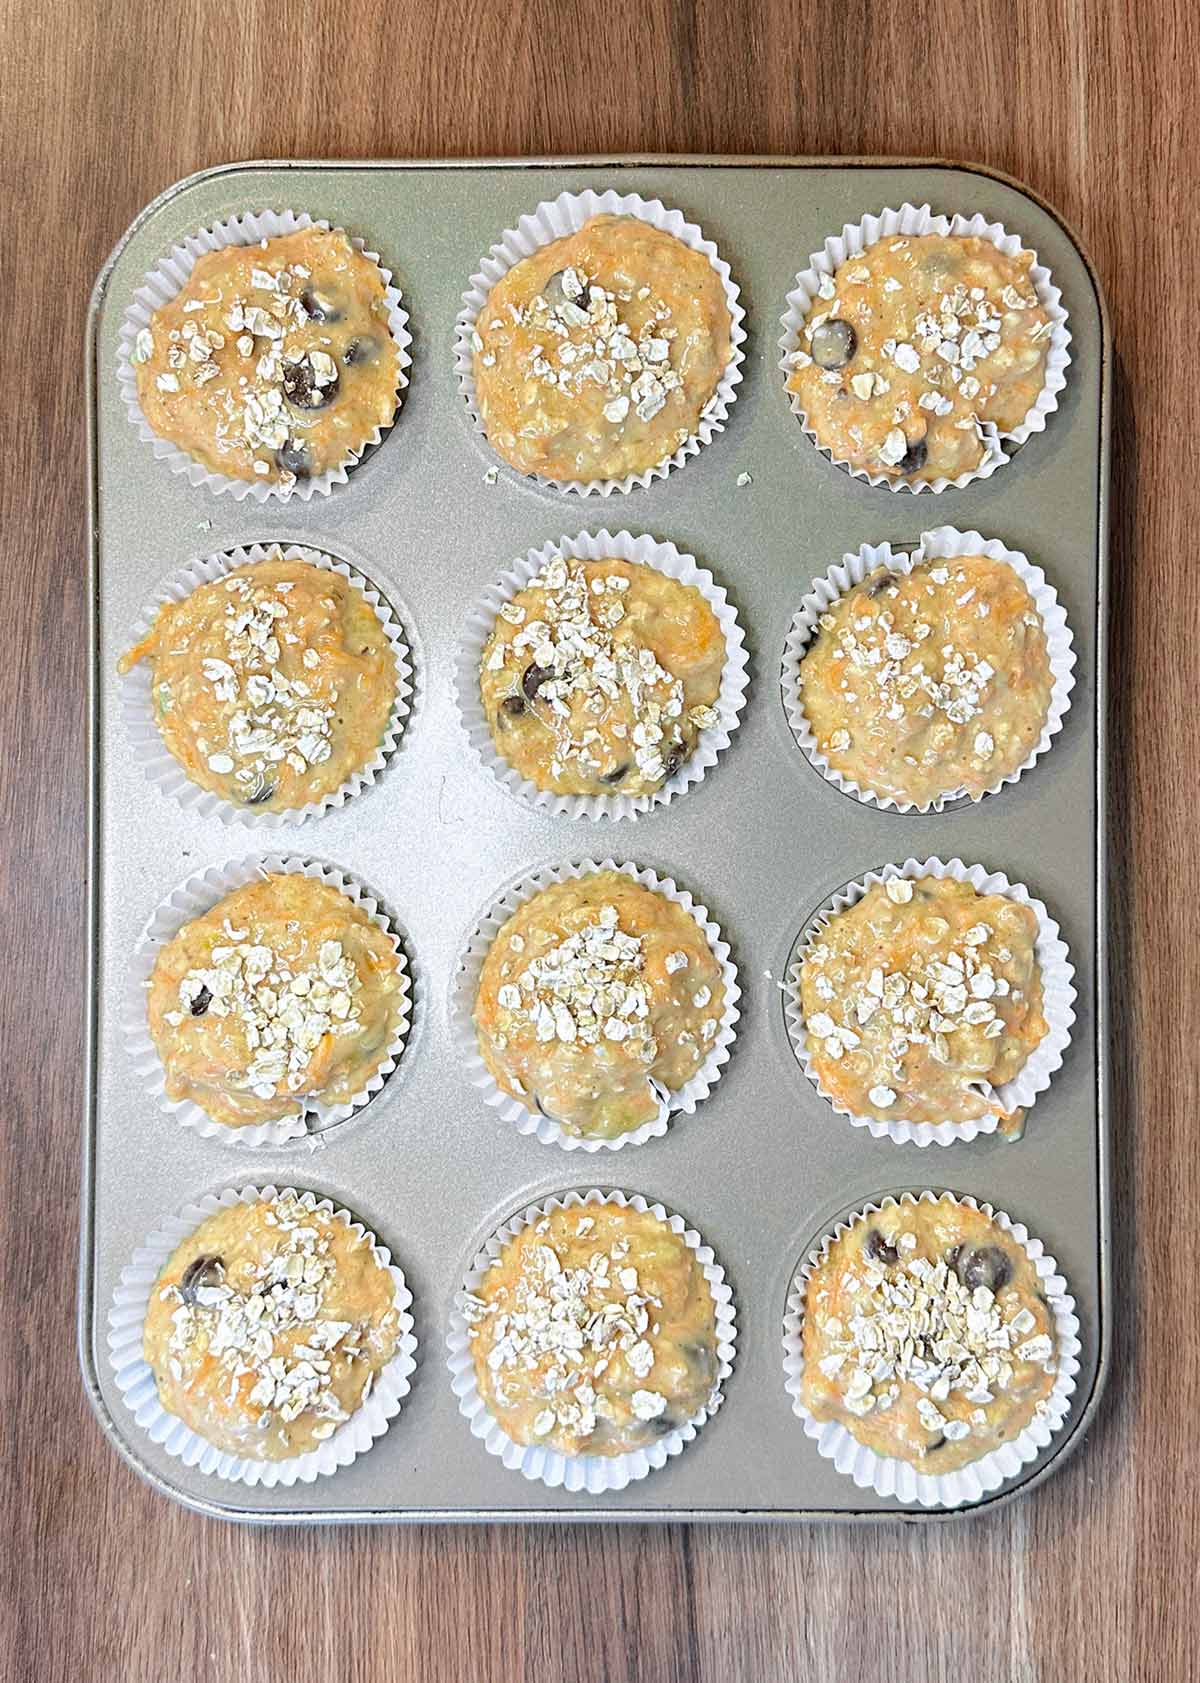 The batter divided between twelve muffin cases.